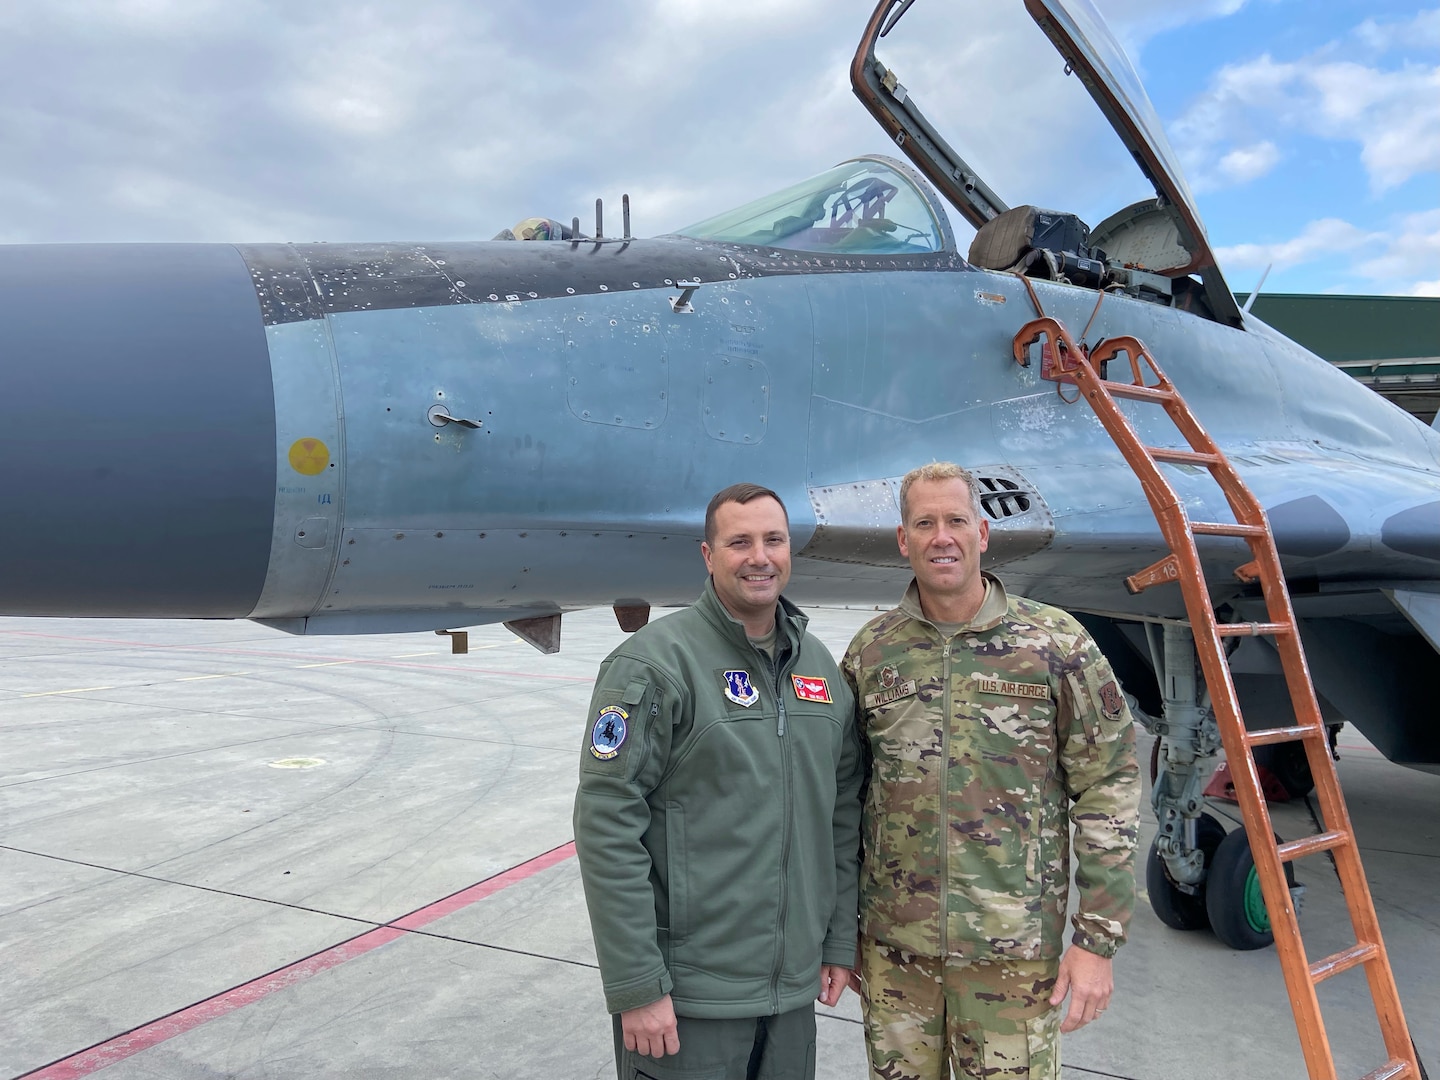 U.S. Air National Guard Col. Todd Wiles, commander of the 118th Wing, left, and Chief Master Sgt. Trenton Williams, 118th Wing command chief, right, poses in front of a Bulgarian MiG-29 during a State Partnership visit on Graf Ignatievo Air Base, Graf Ignatievo, Bulgaria.